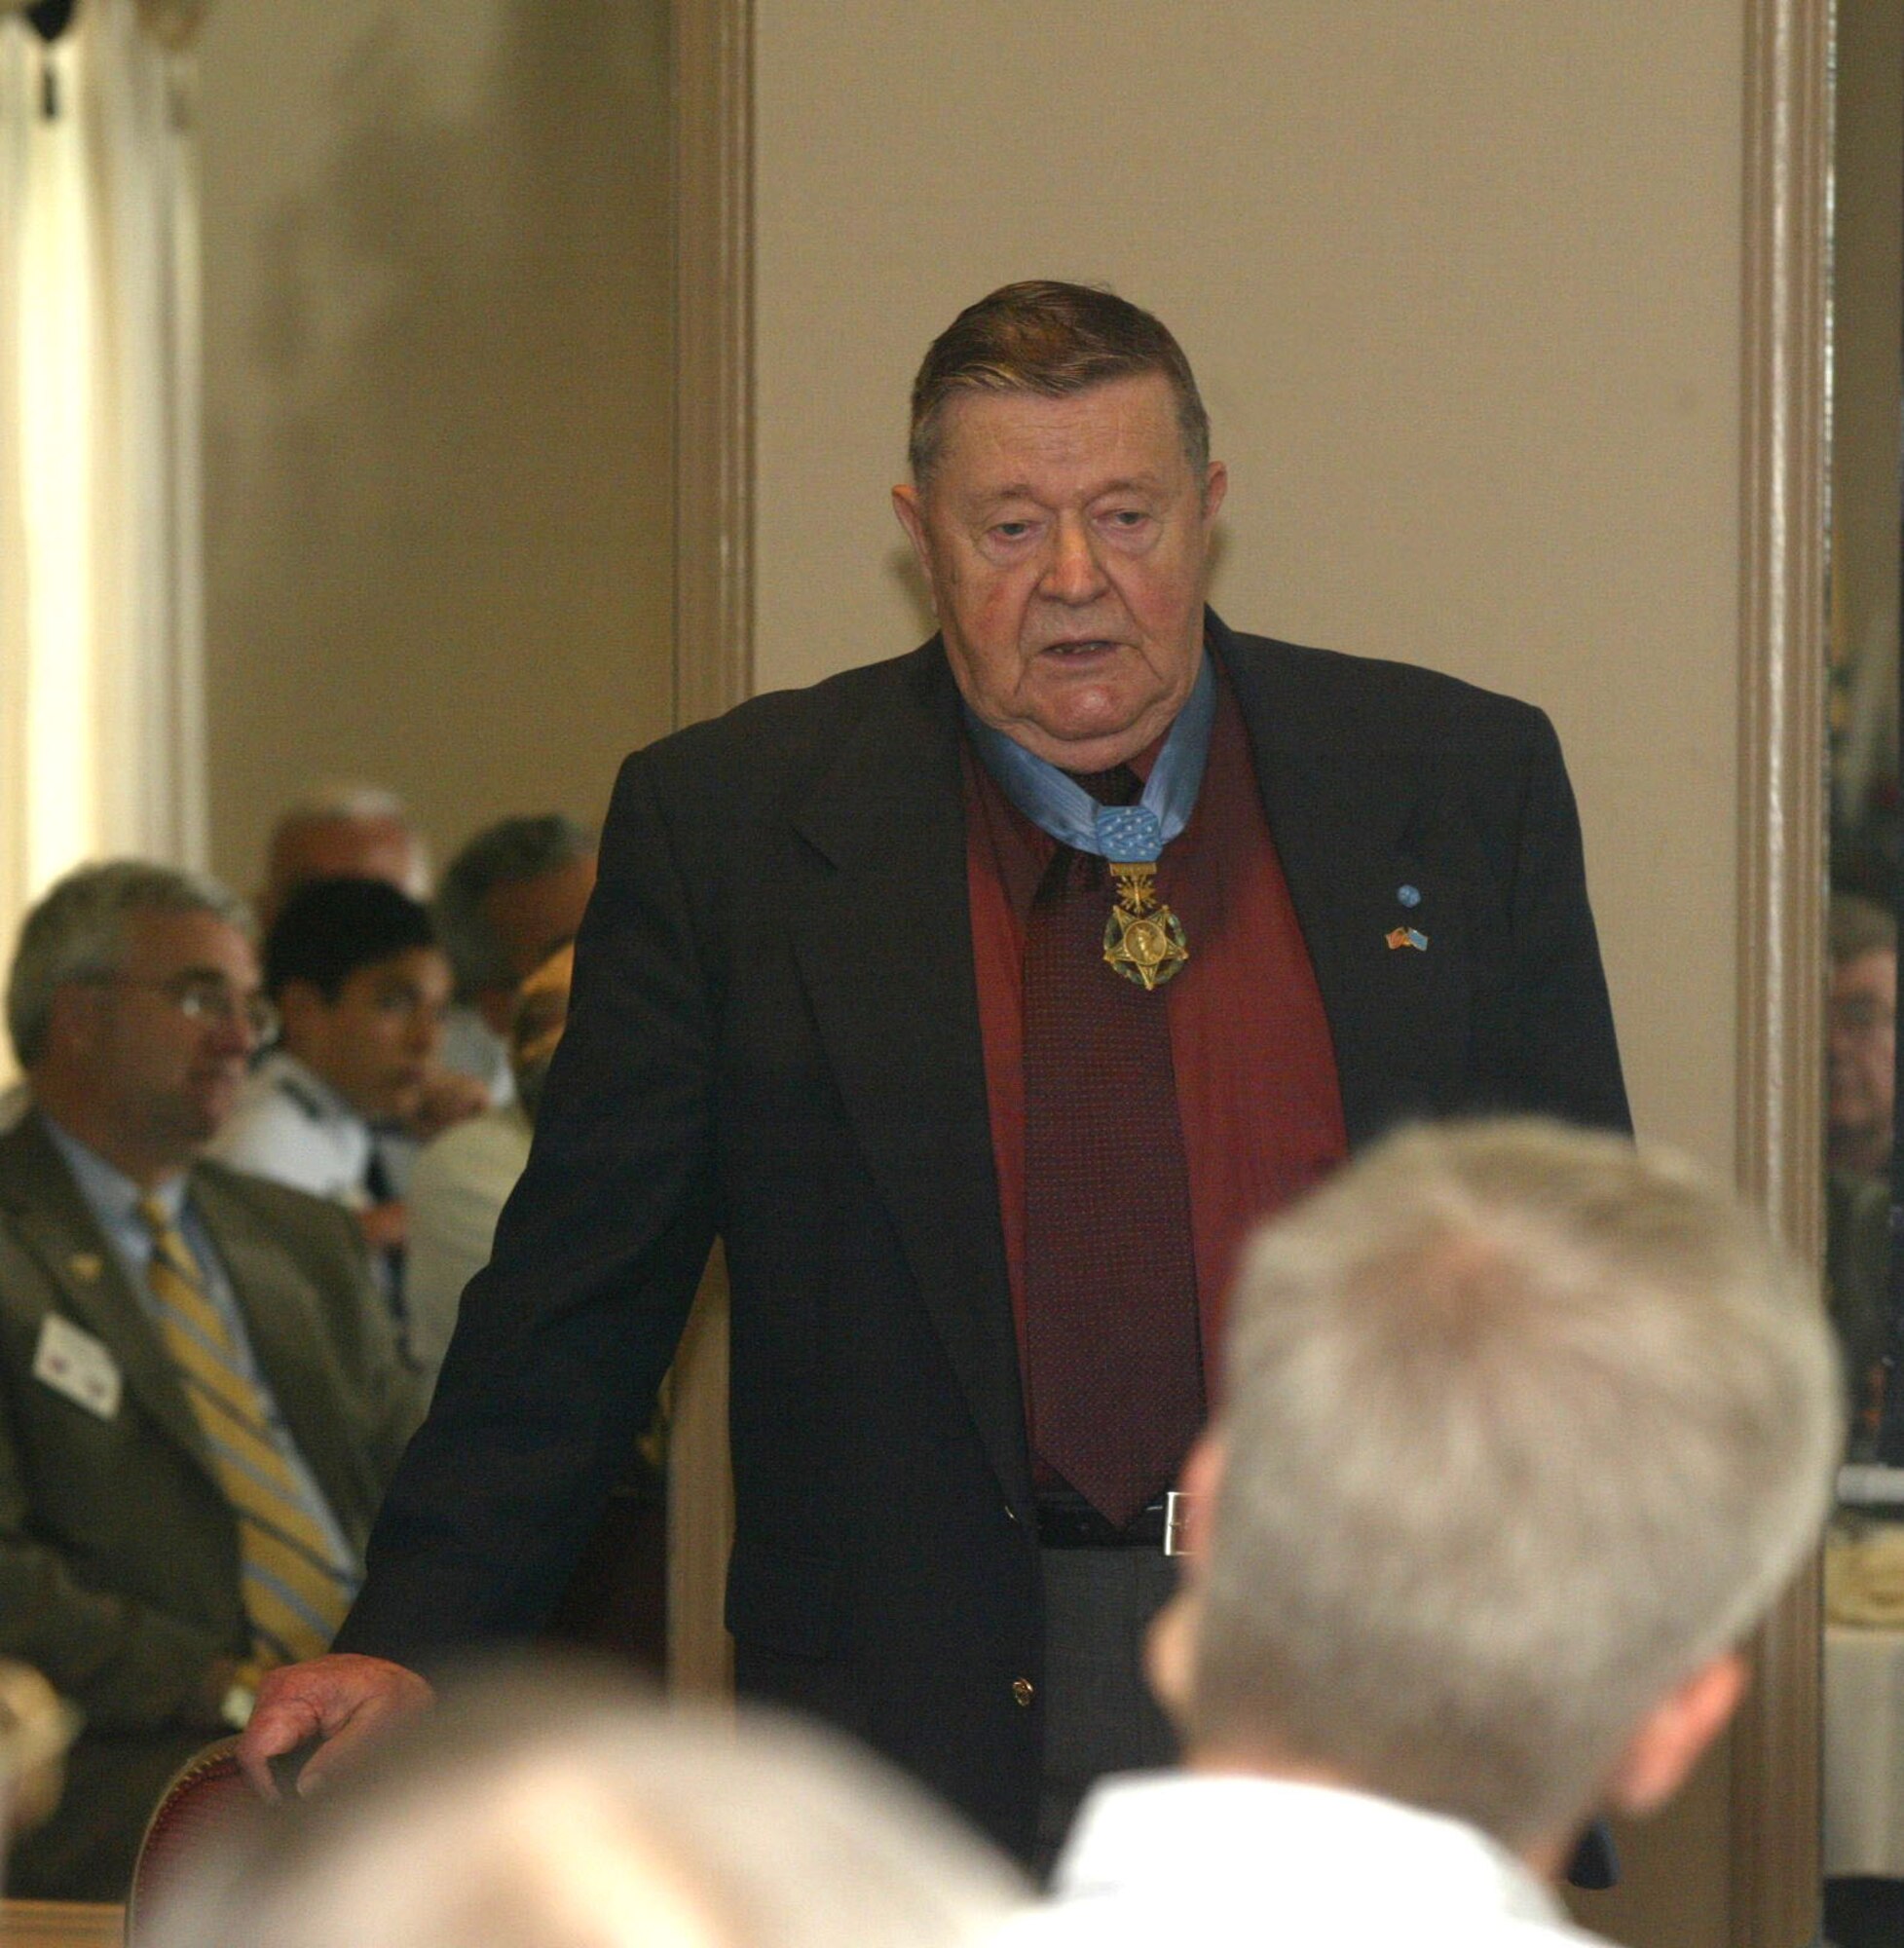 DOBBINS AIR RESERVE BASE, Ga. -- Medal of Honor recipient Col. Joe M. Jackson spoke to a group of Air Force Association members recently.  Colonel Jackson earned the Medal of Honor in 1968 for a heroic rescue of a combat control team stranded at Kham Duc, South Vietnam.  A Newnan native, Colonel Jackson repeatedly referred to himself as "The luckiest guy in the whole world." (Air Force photo/Don Peek)